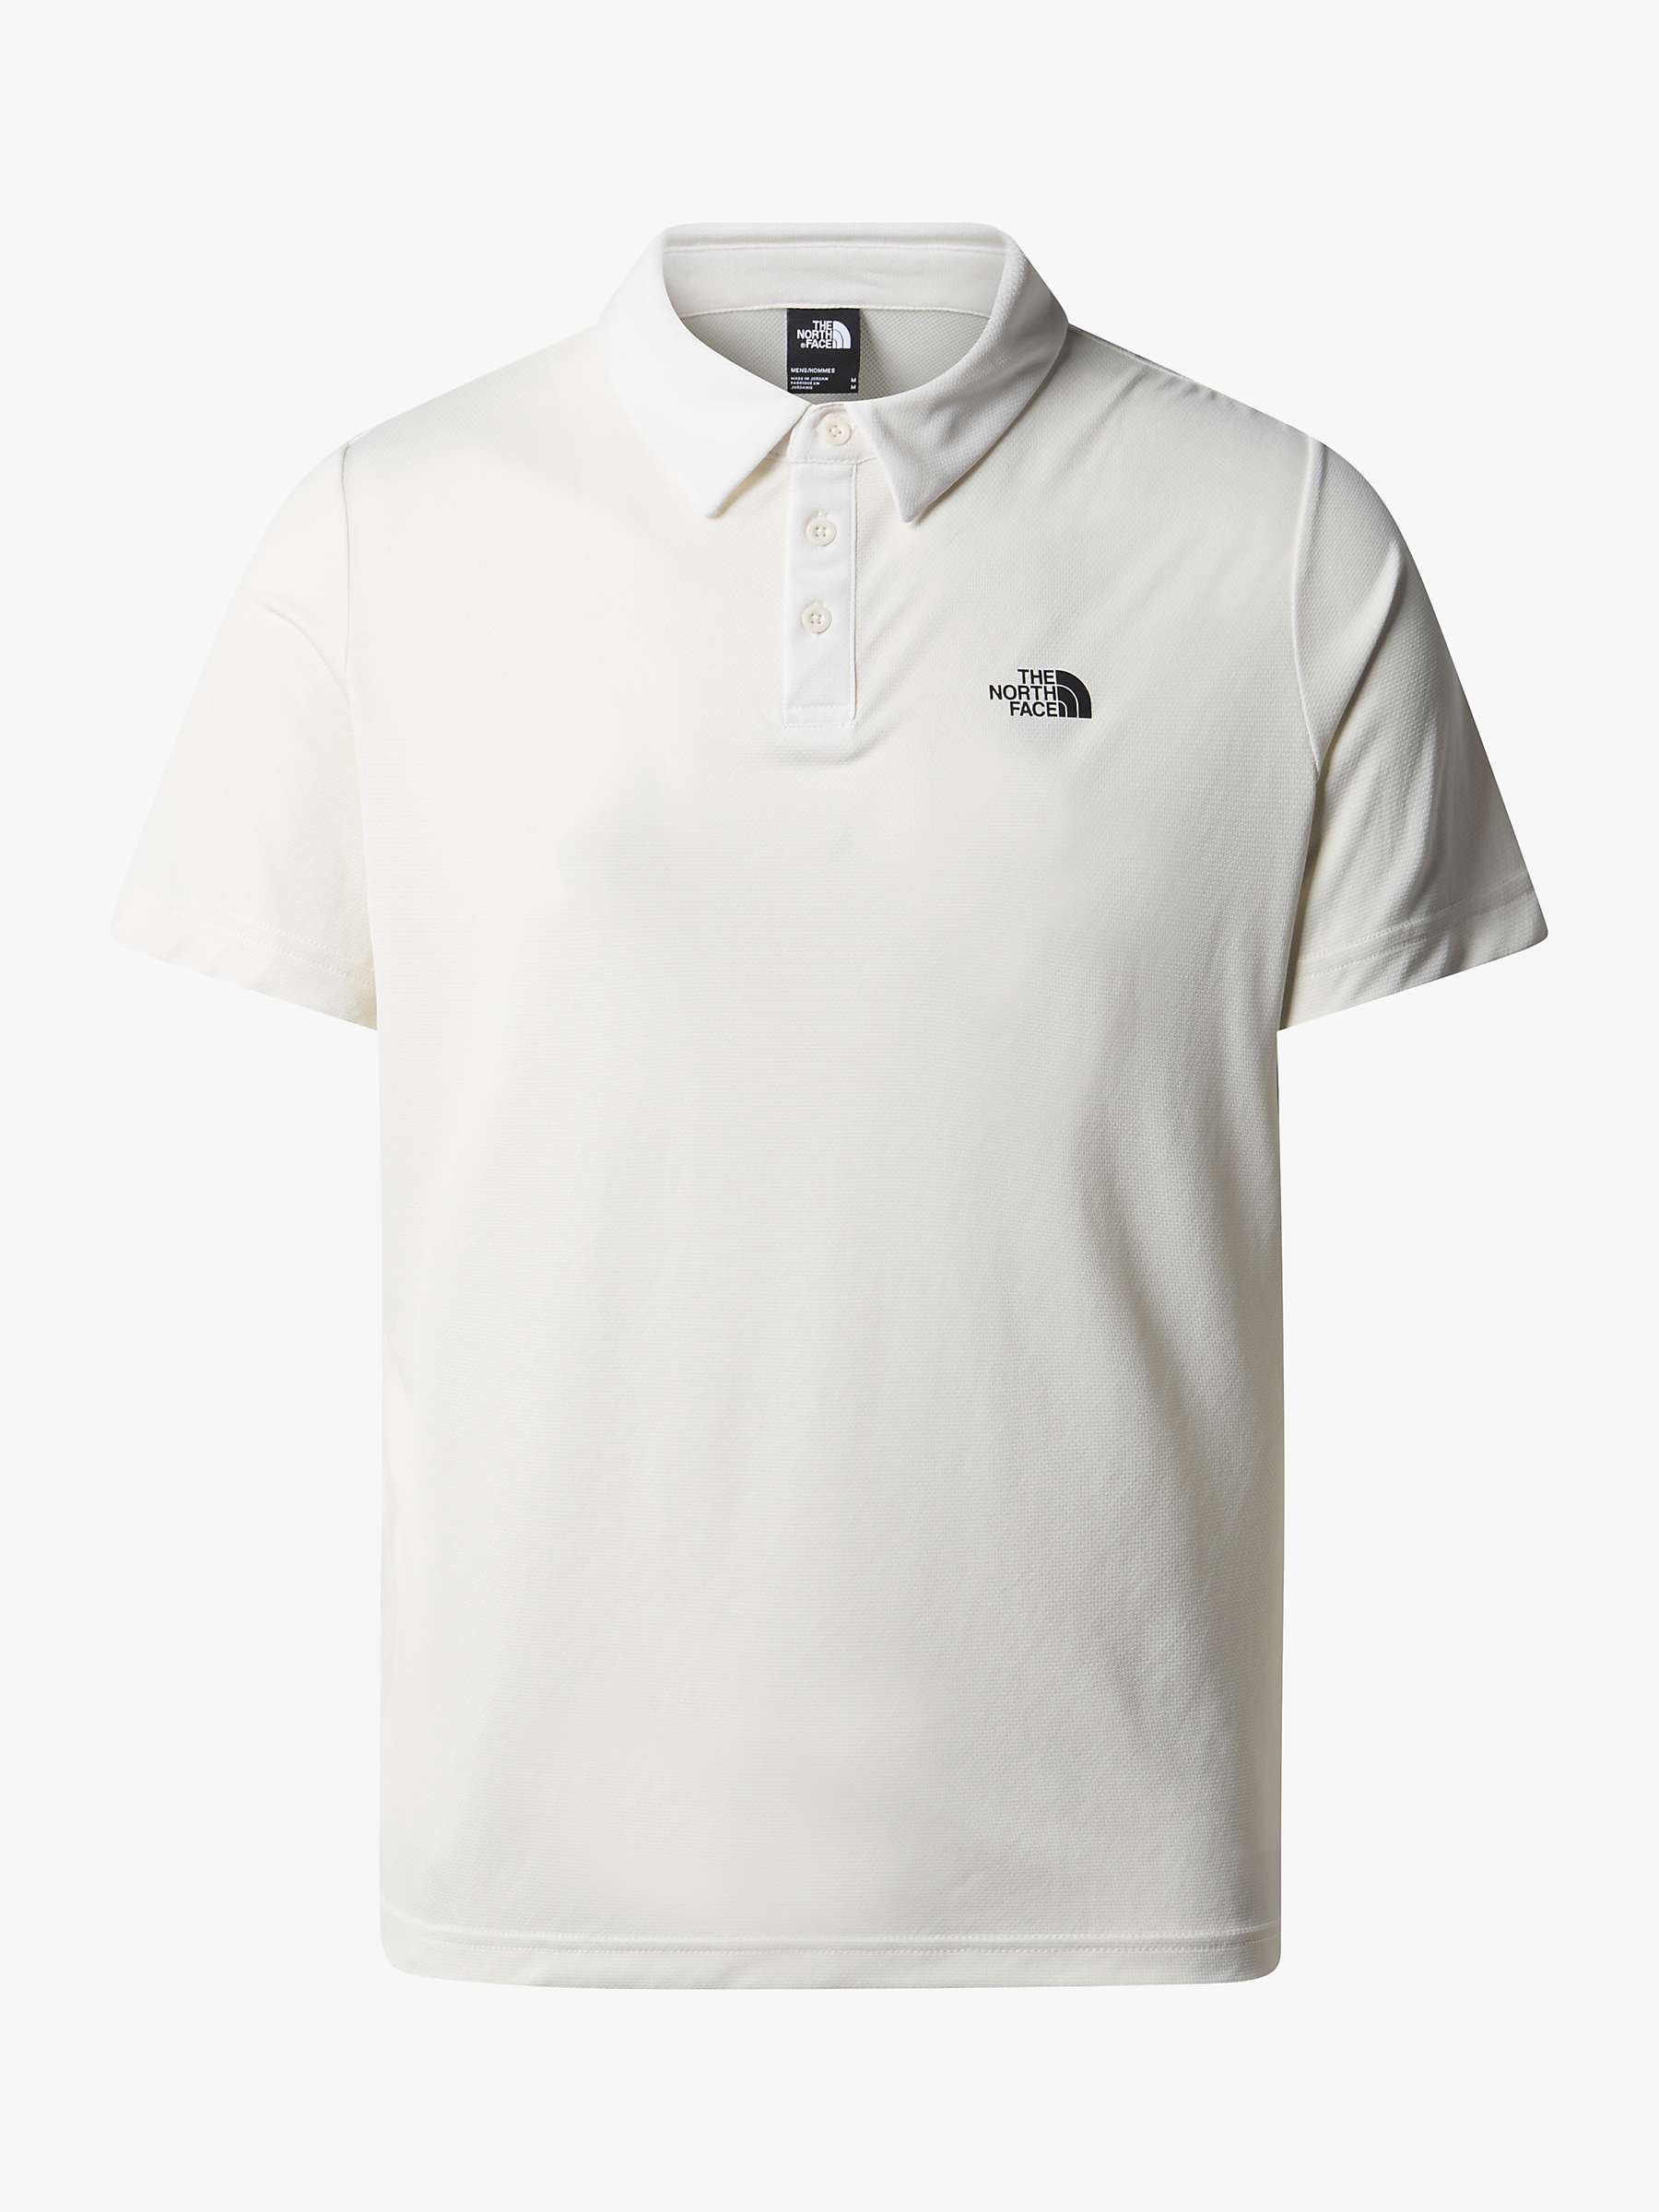 Buy The North Face Tanken Polo Shirt Online at johnlewis.com